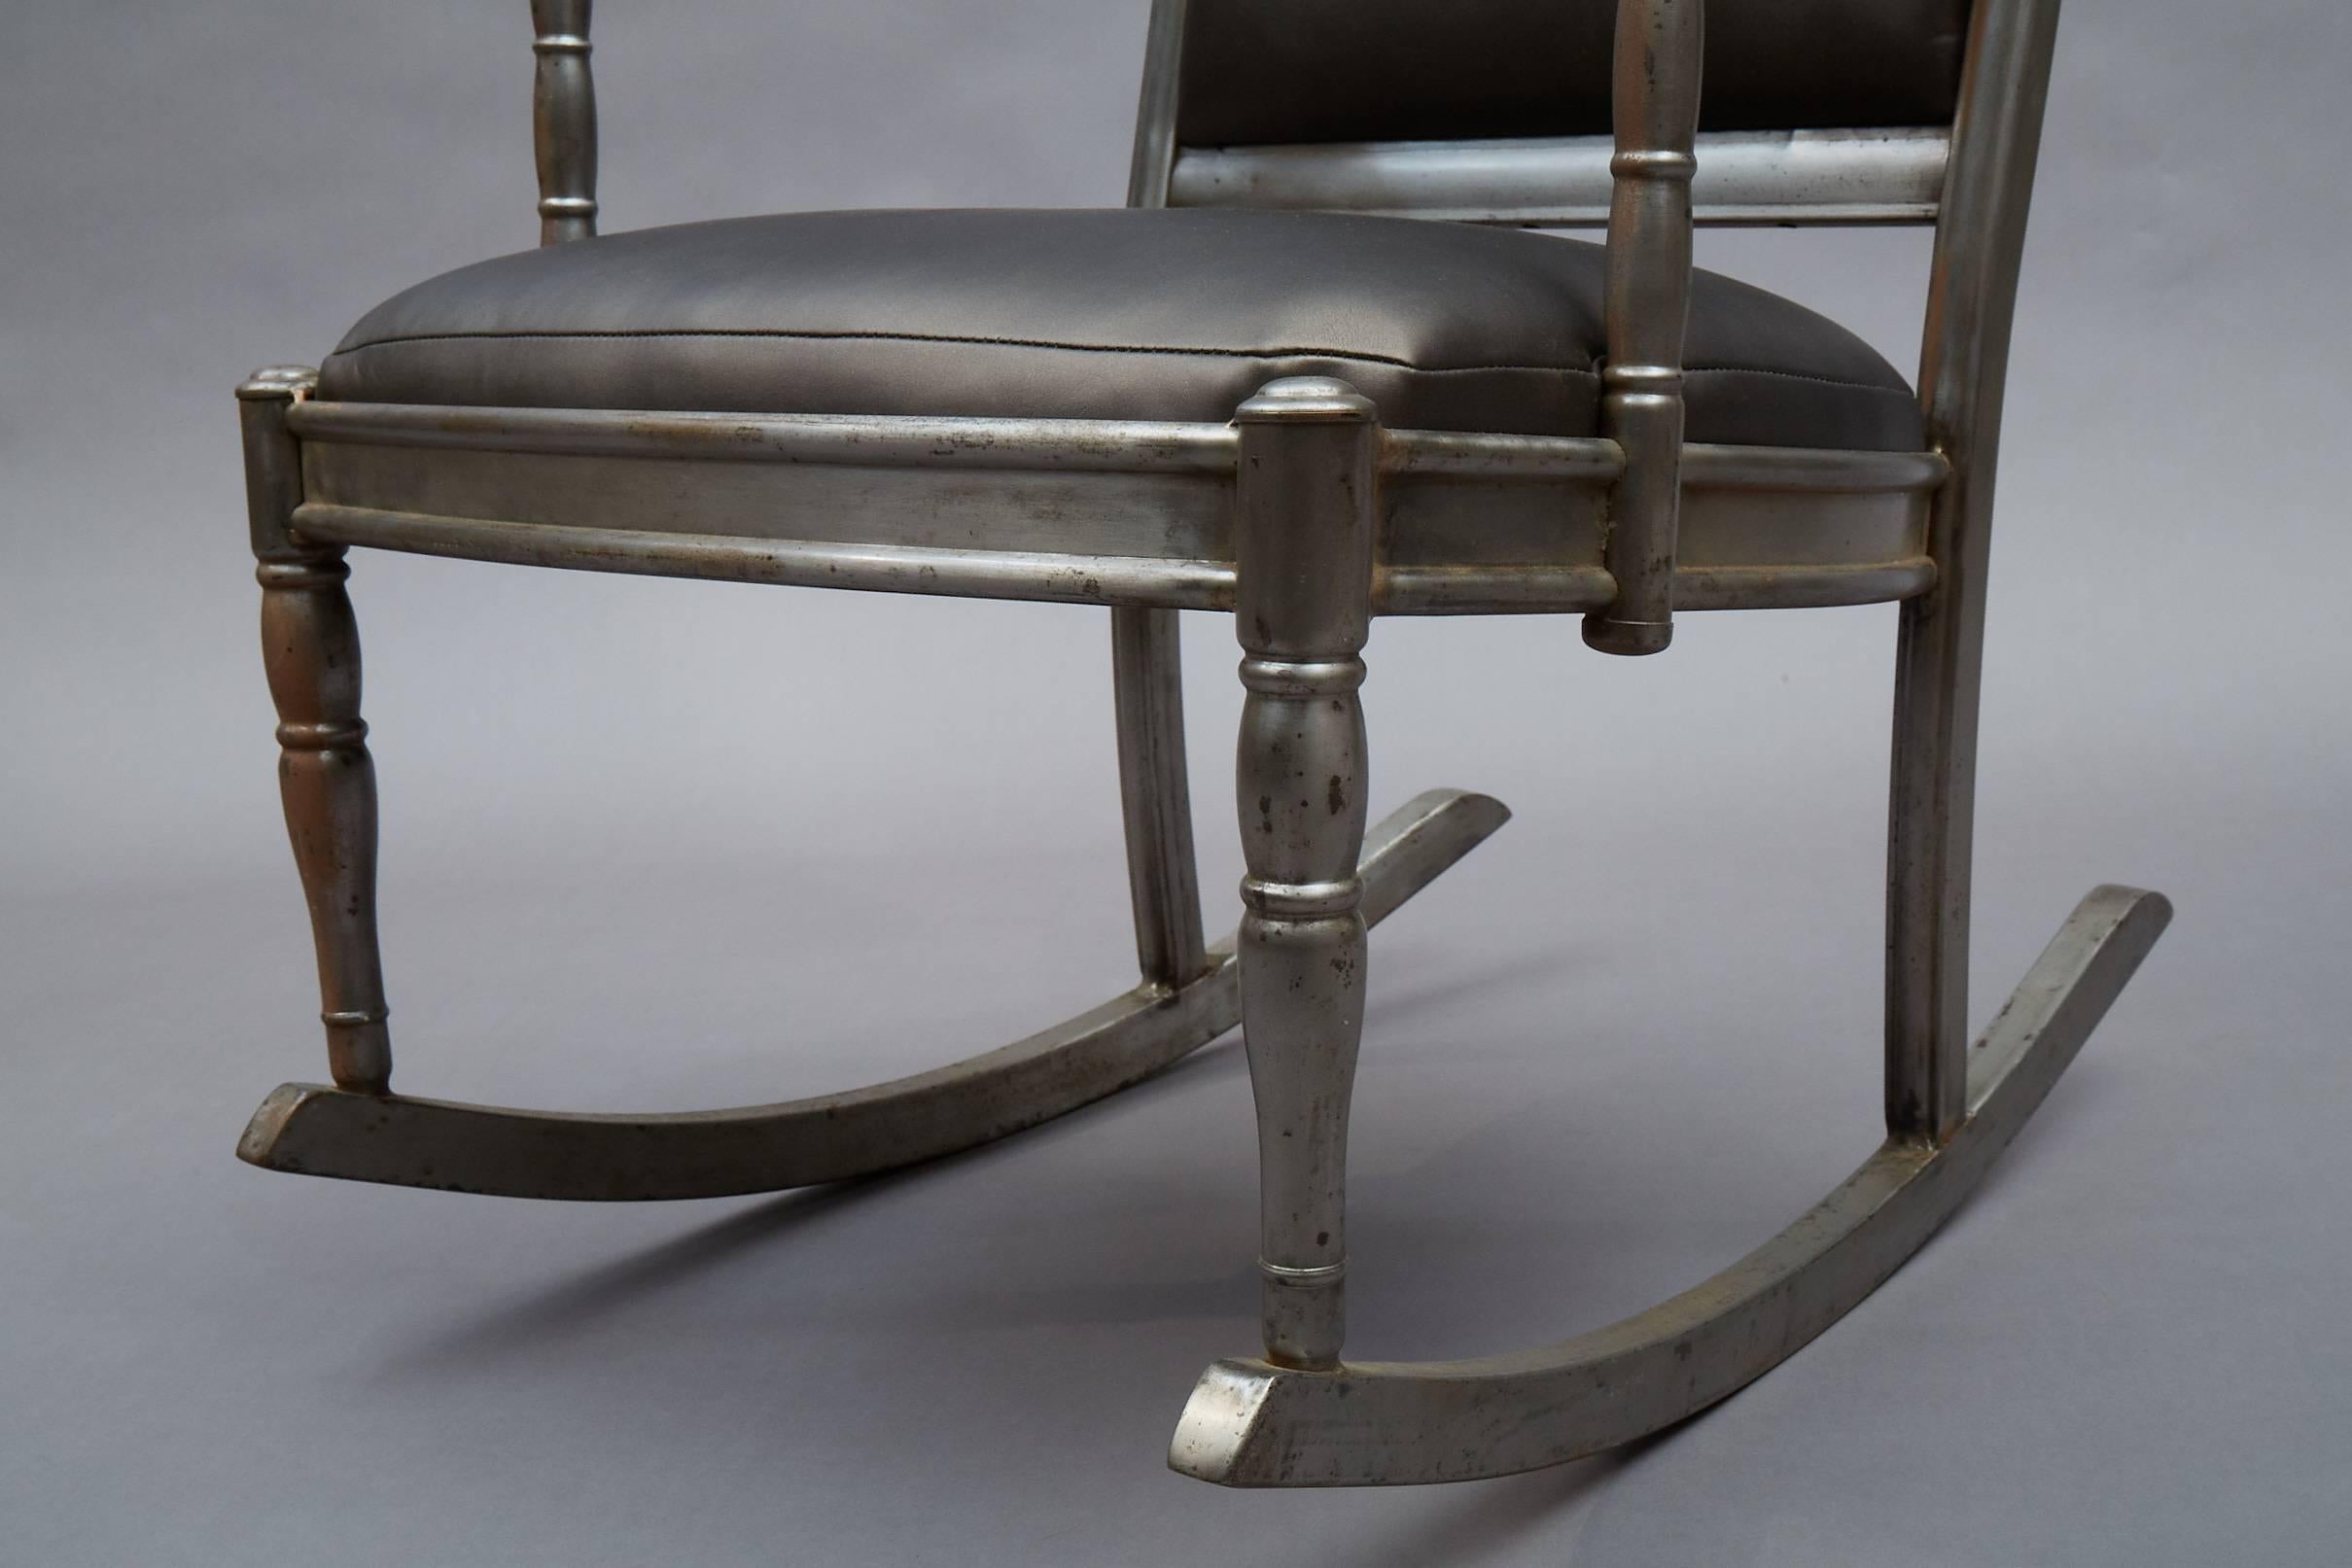 Simmons Brushed Steel and Gunmetal Vinyl Rocking Chair In Excellent Condition For Sale In Brooklyn, NY